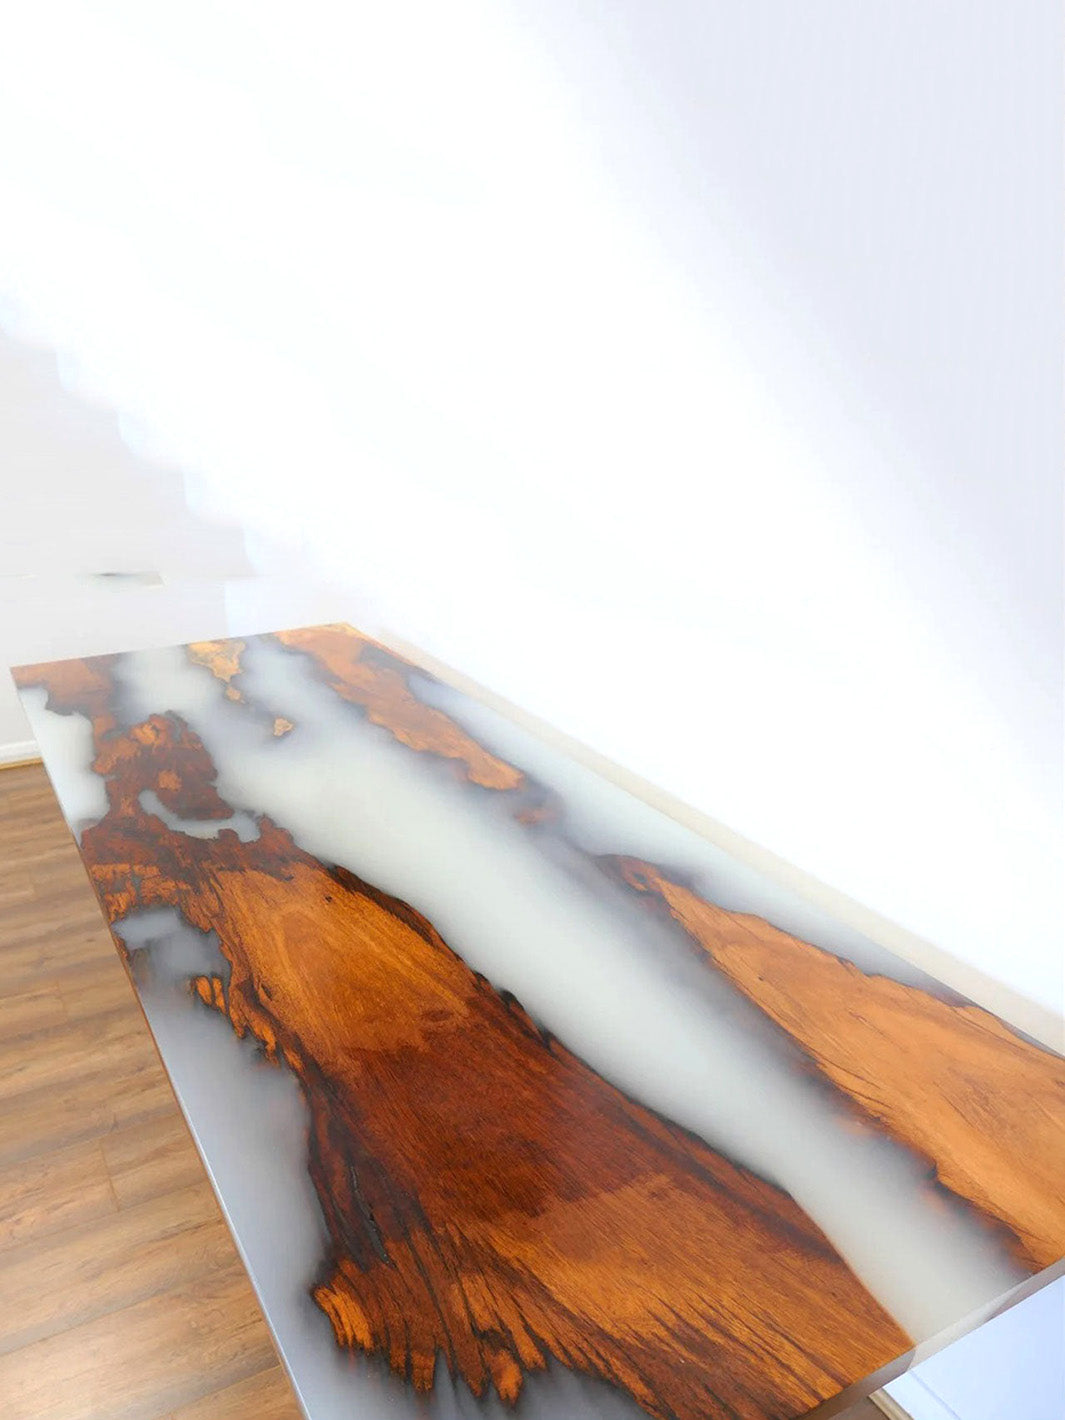 Handcrafted Rosewood Slab Epoxy Resin Wooden Dining Table | 170x70cm Made 4 Decor Tables MDR0002-3